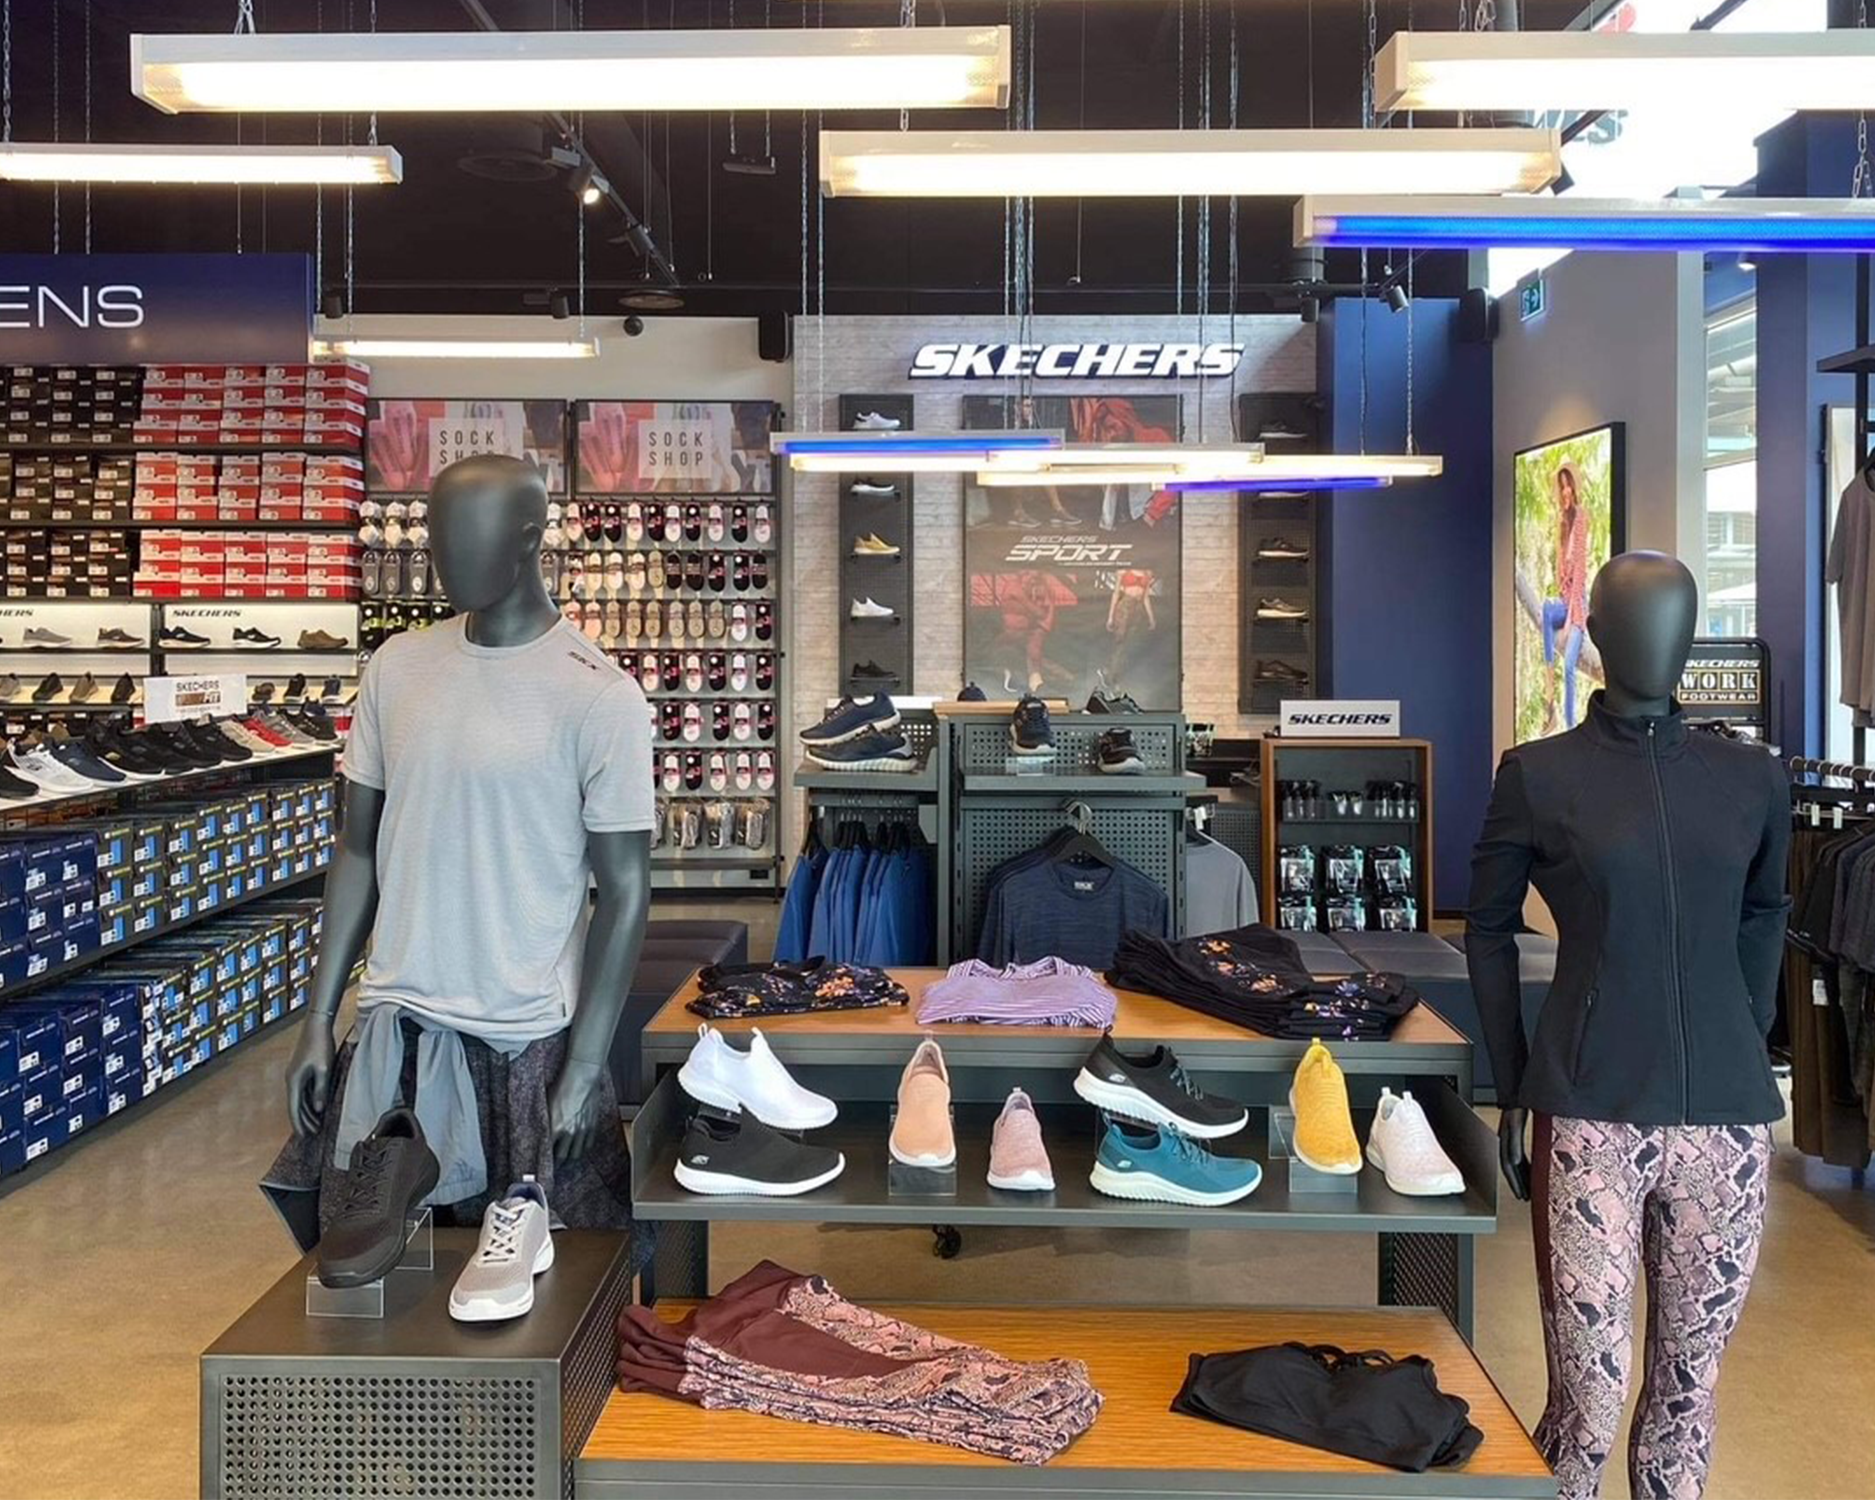 Skechers Store Design & Visual Merchandising - Display Tables and Mannequins